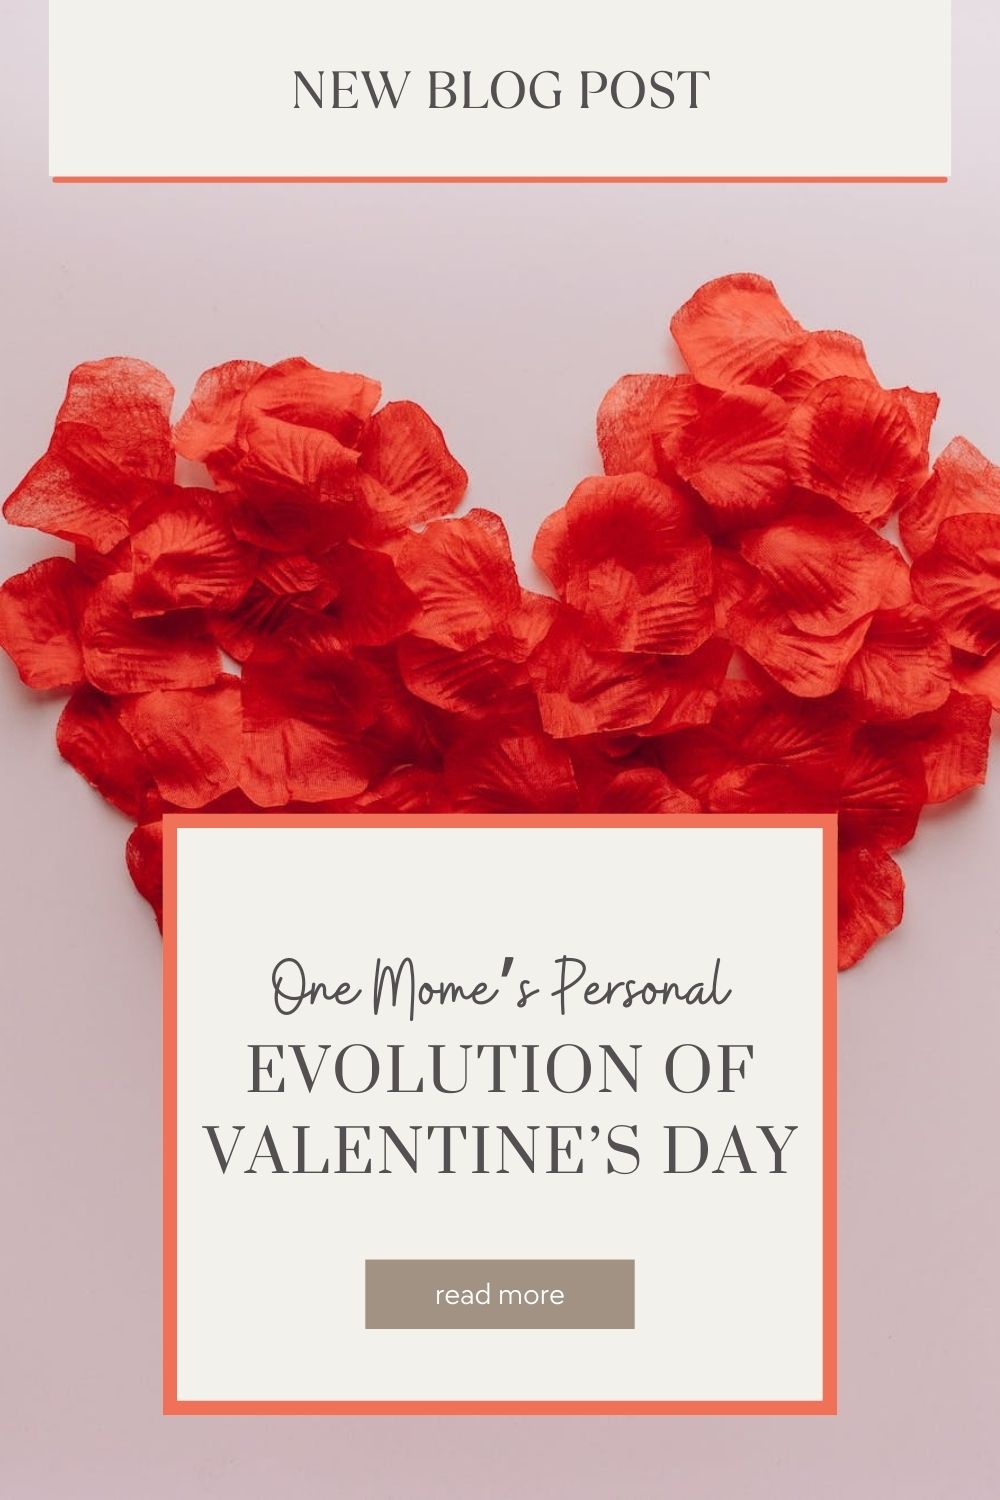 One mom's personal evolution of Valentines Day